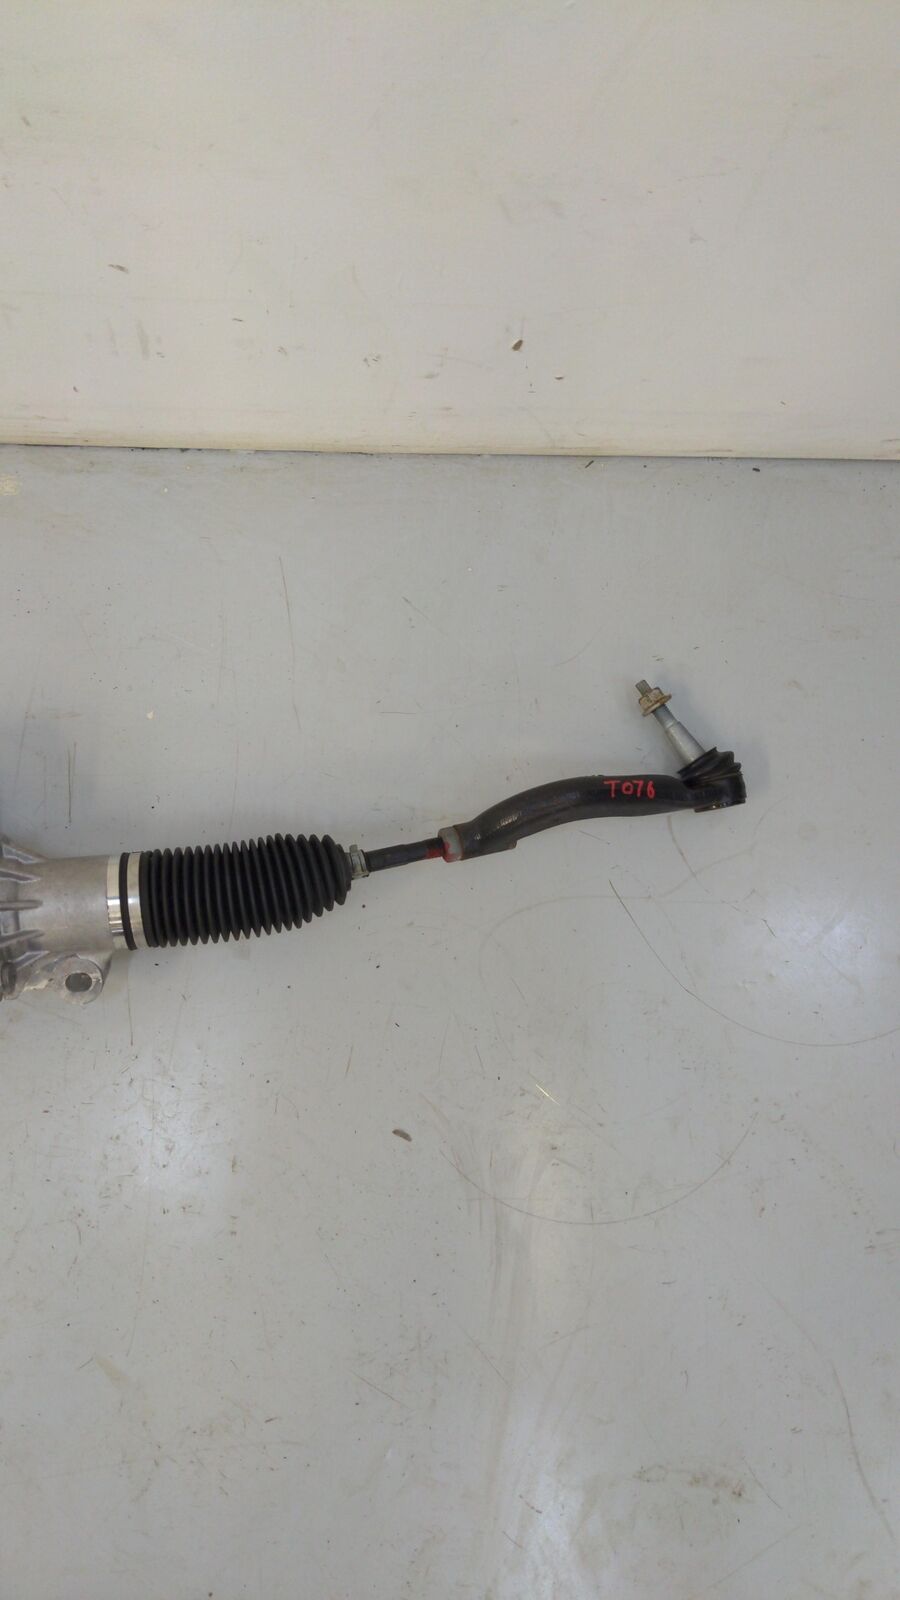 14 CHEVY CORVETTE Steering Gear Rack And Pinion *Notes* 825902385 46K KM'S